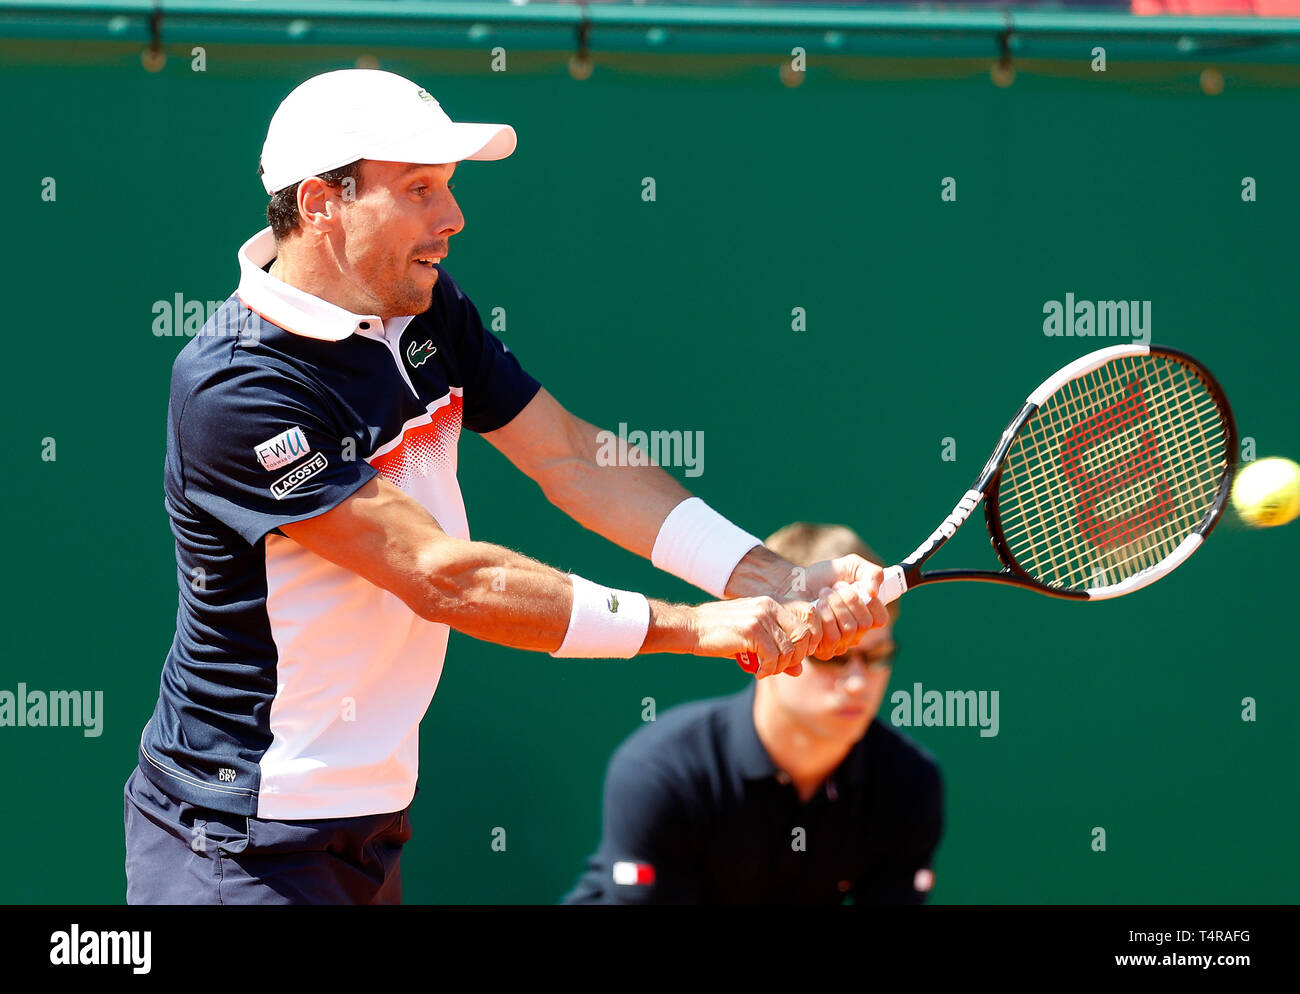 Roquebrune Cap Martin, France. 17th Apr, 2019. Roberto Bautista Agut of  Spain hits a return during the singles second match against Rafael Nadal of  Spain at the Monte-Carlo Rolex Masters tennis tournament